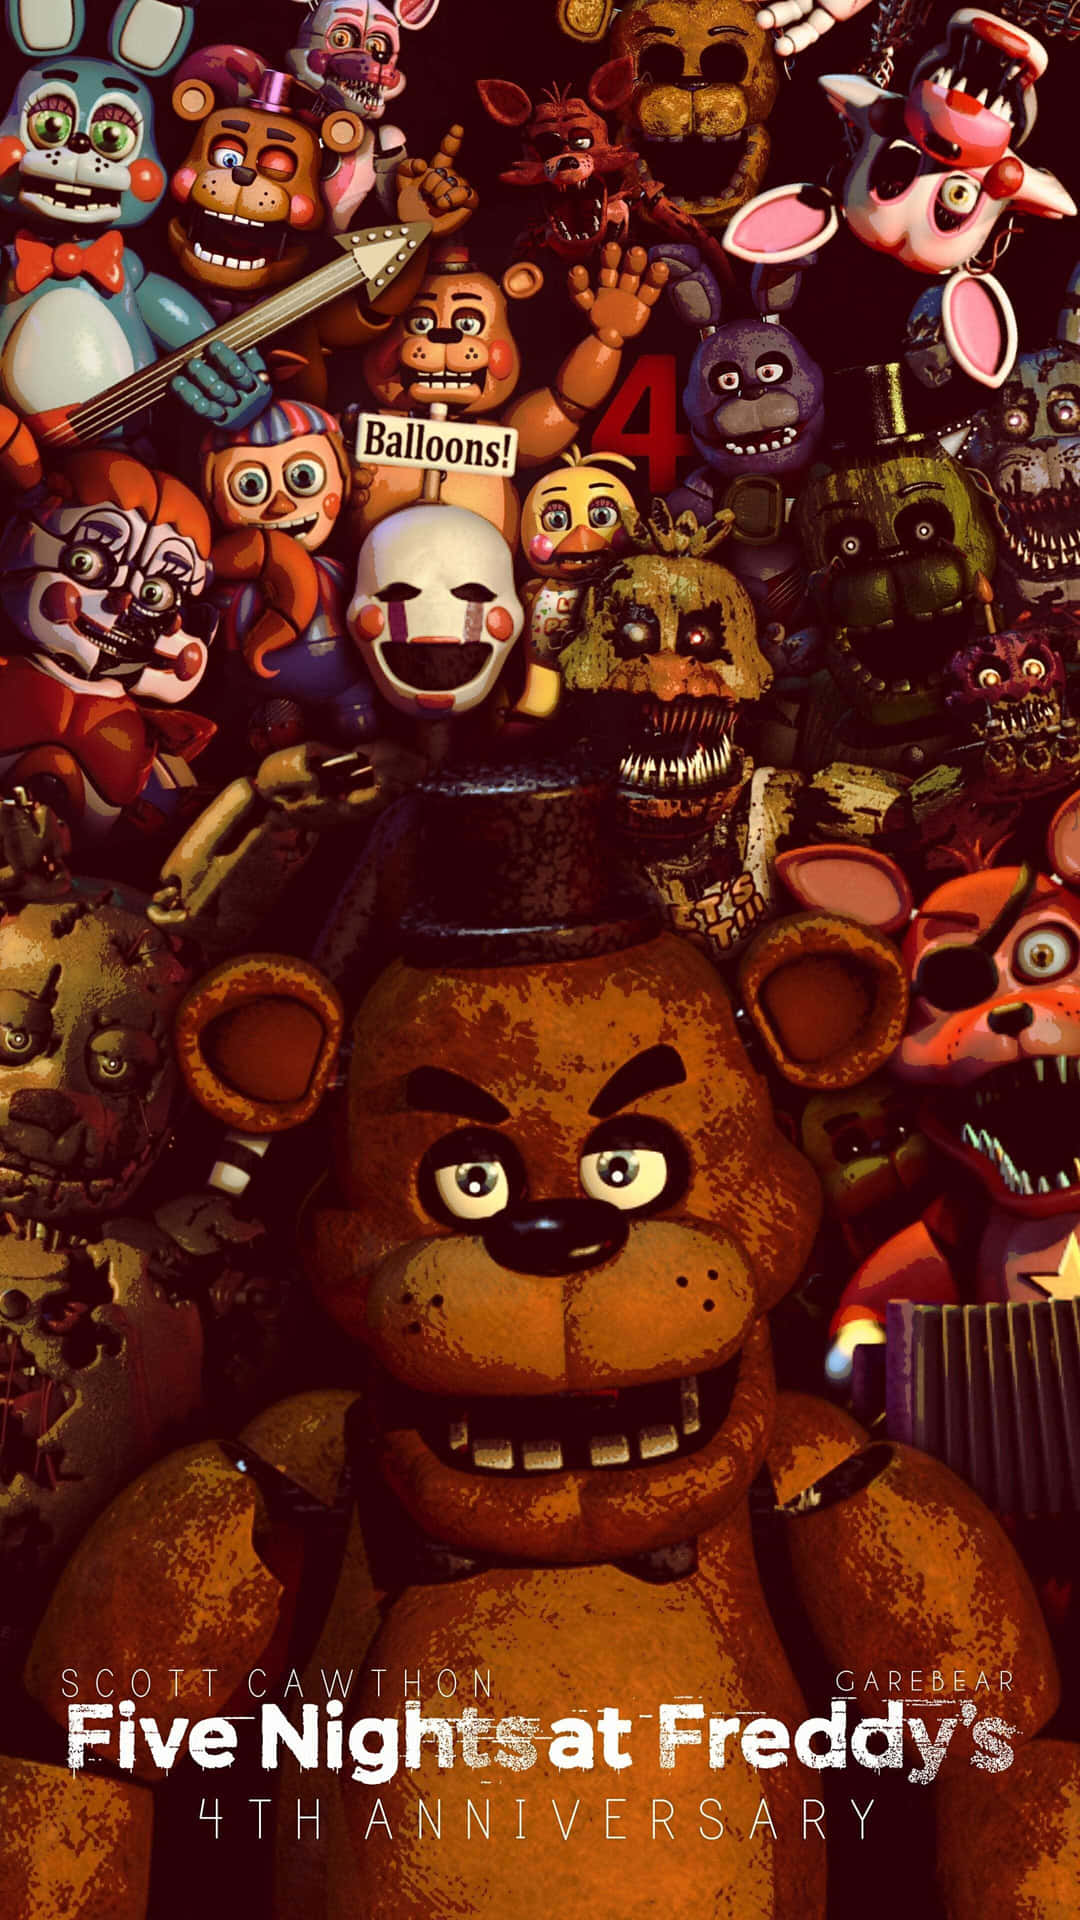 Five Nights At Freddy's 5th Anniversary Poster